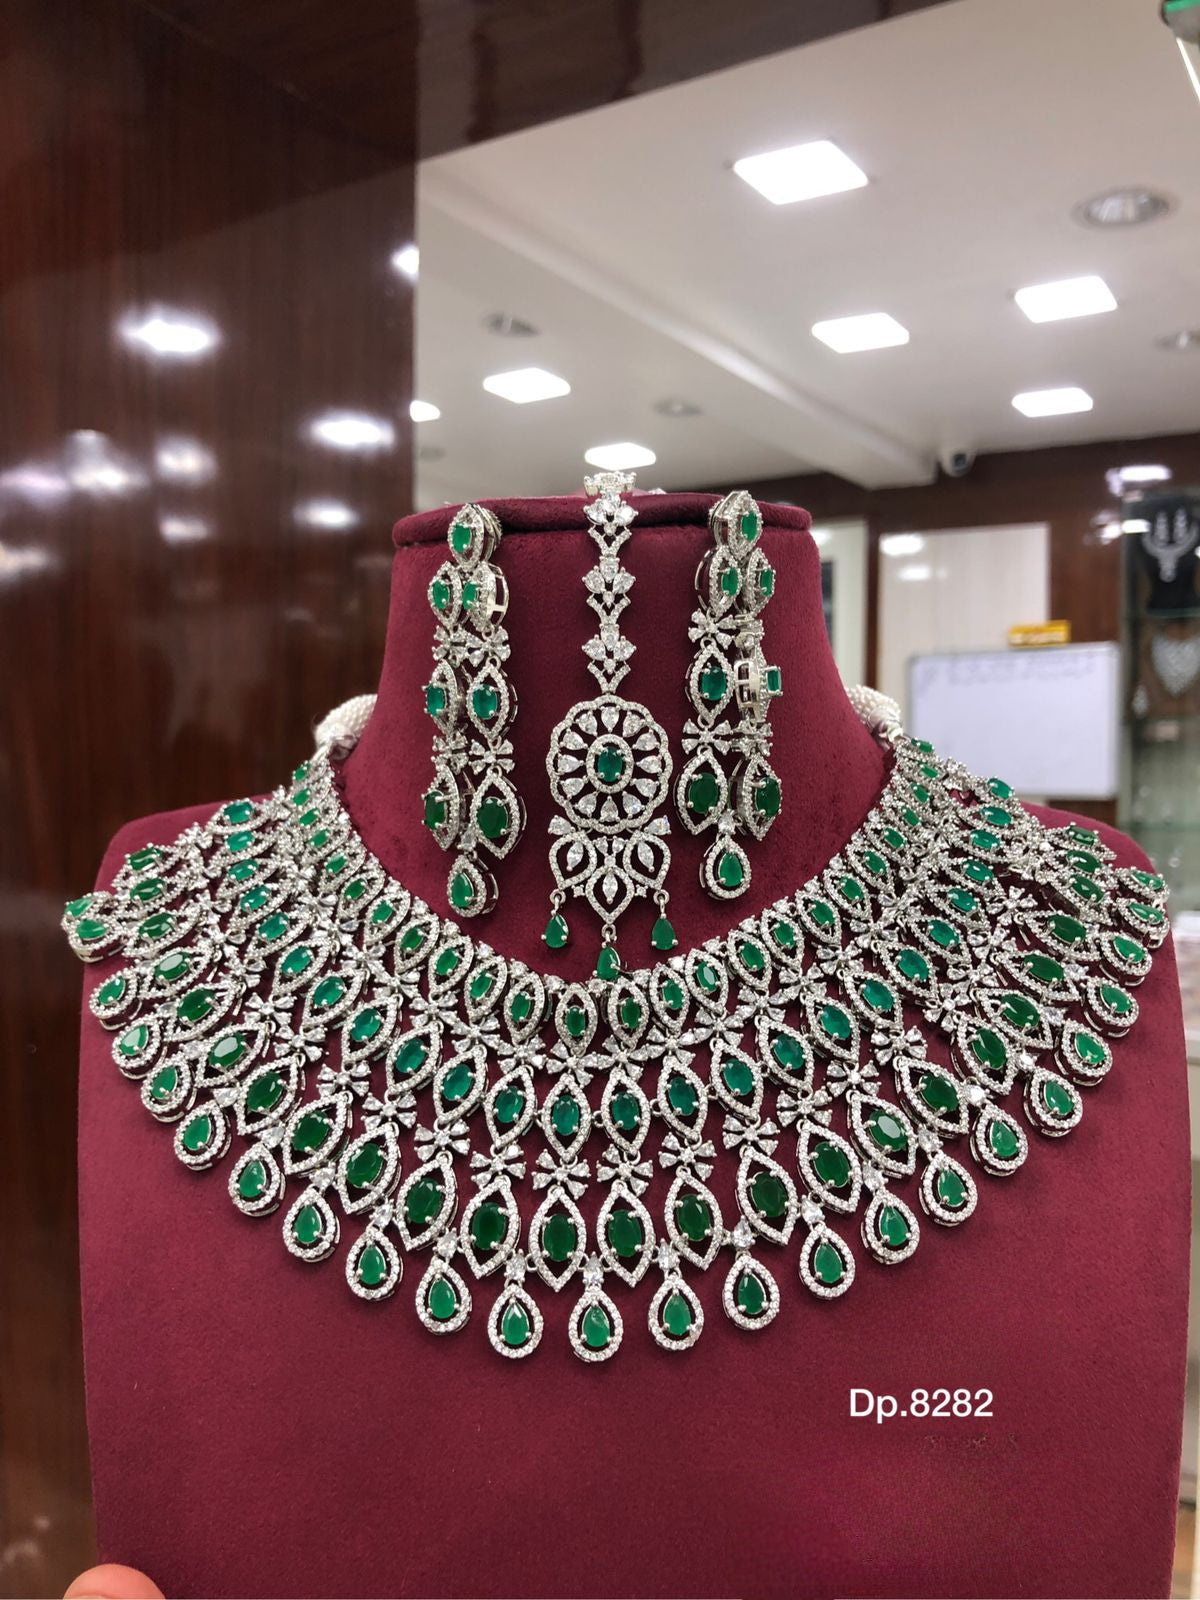 High Quality American diamond Full-bridal Necklace With Earrings and Maangtikka available in green / baby pink on silver polished